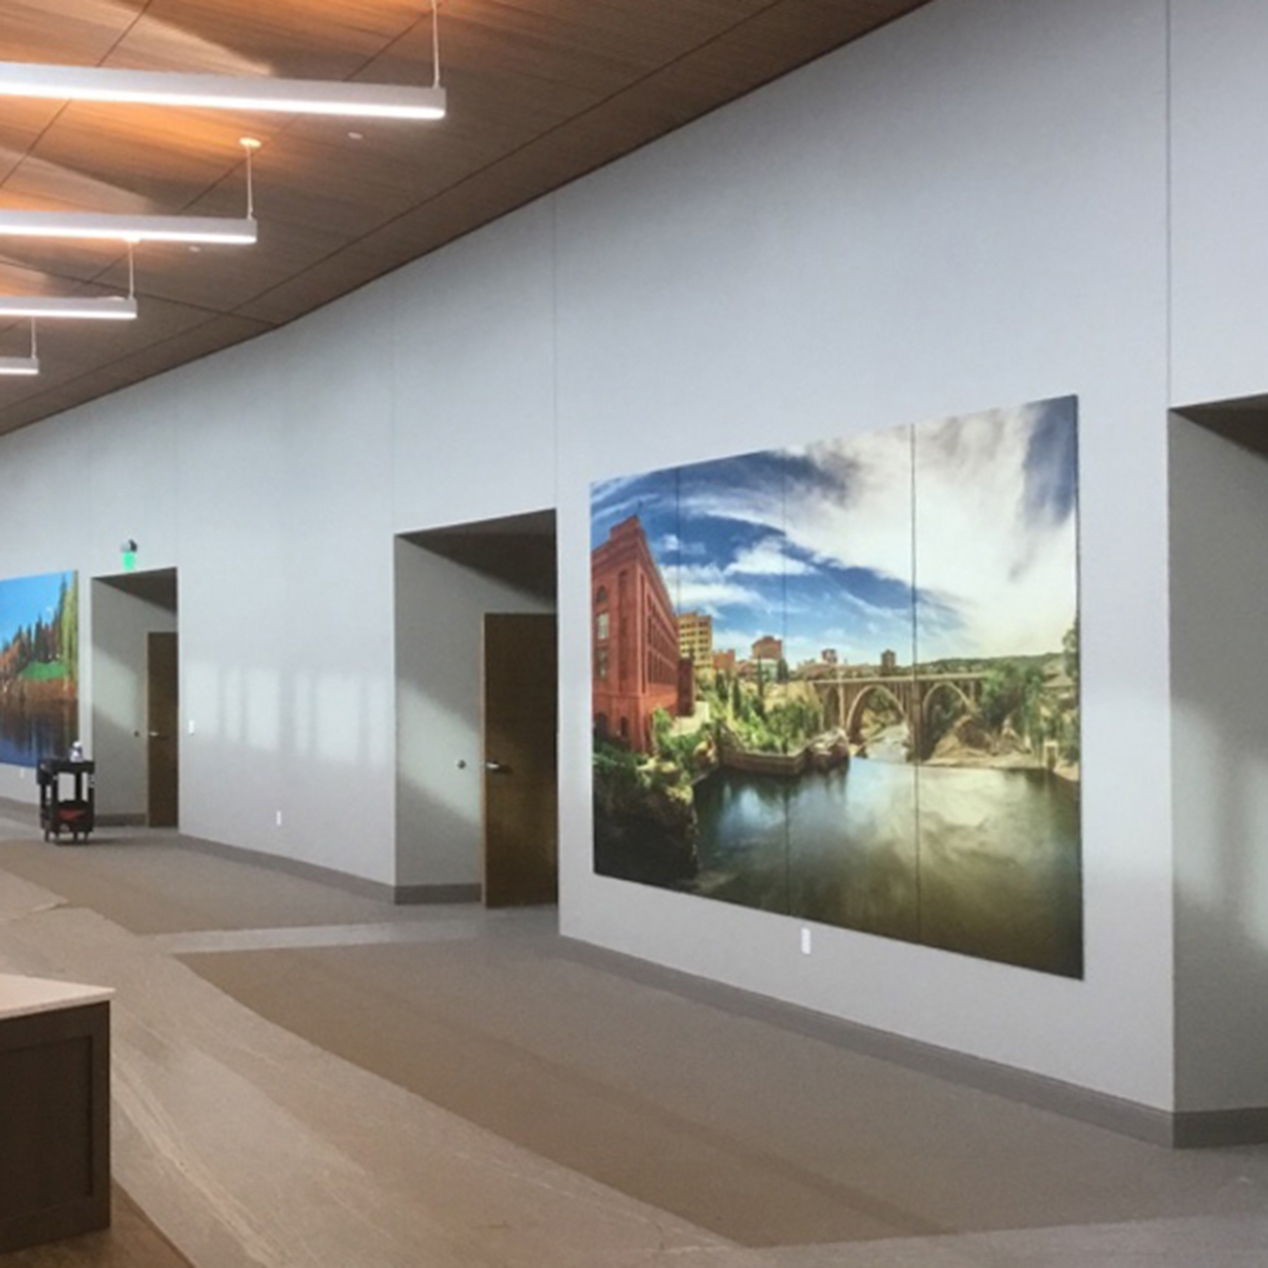 Large wayfinding imagery along hallways at Riverview Retirement’s memory care facility not only helps orient residents, but these realistic pictures can be calming and often evoke memories. – NAC. Wall imagery created by Complete-Office. Photo courtesy of Bouten Construction.